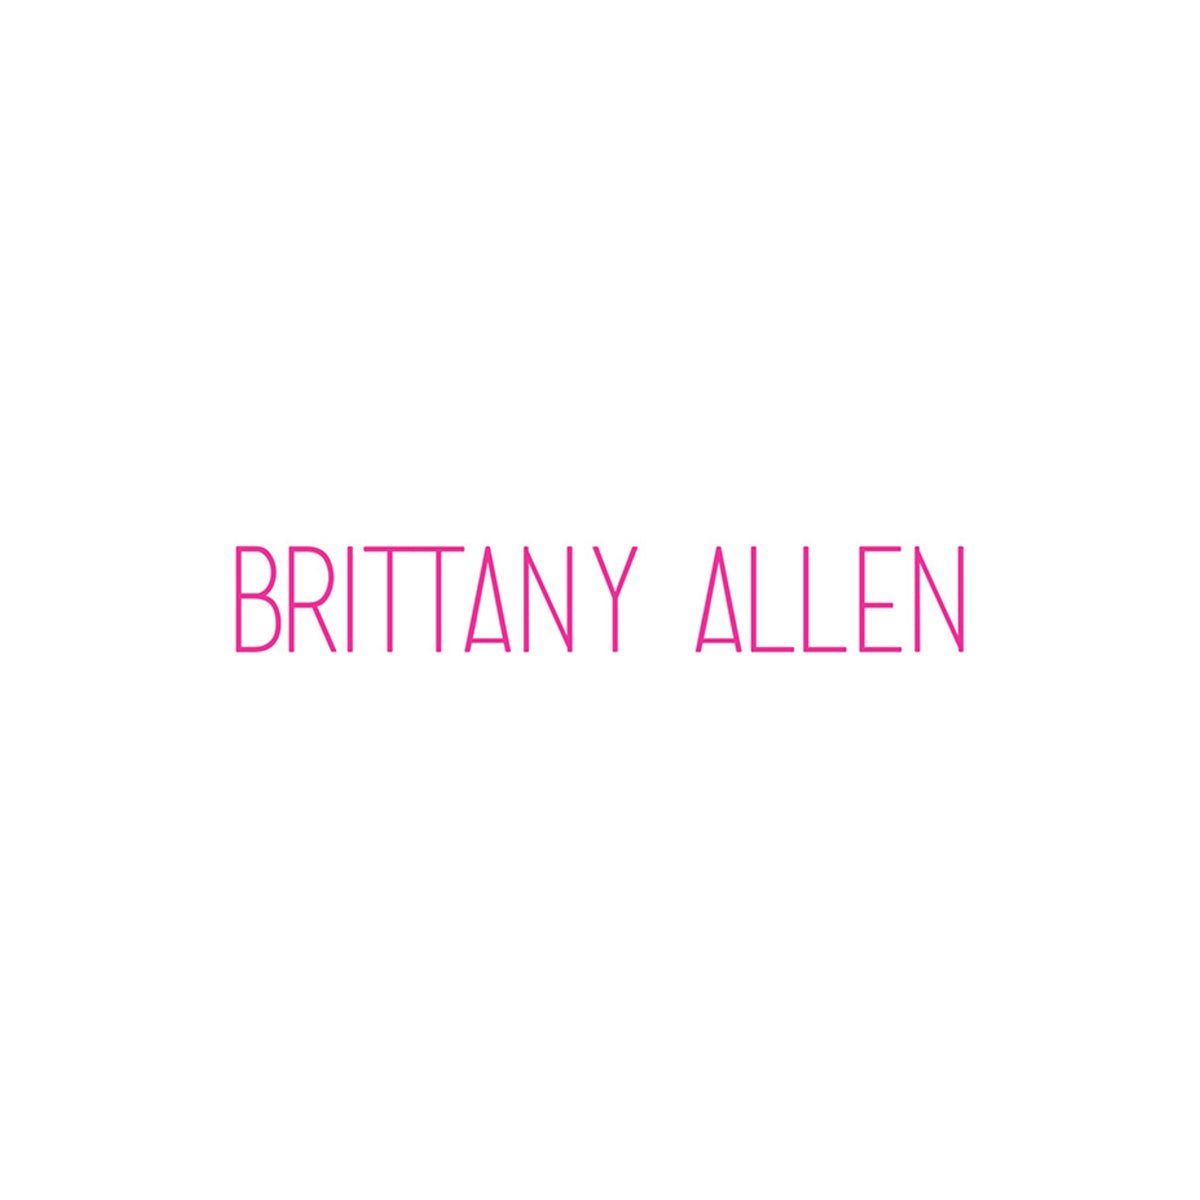 ABOUT THE BRAND – Brittany Allen